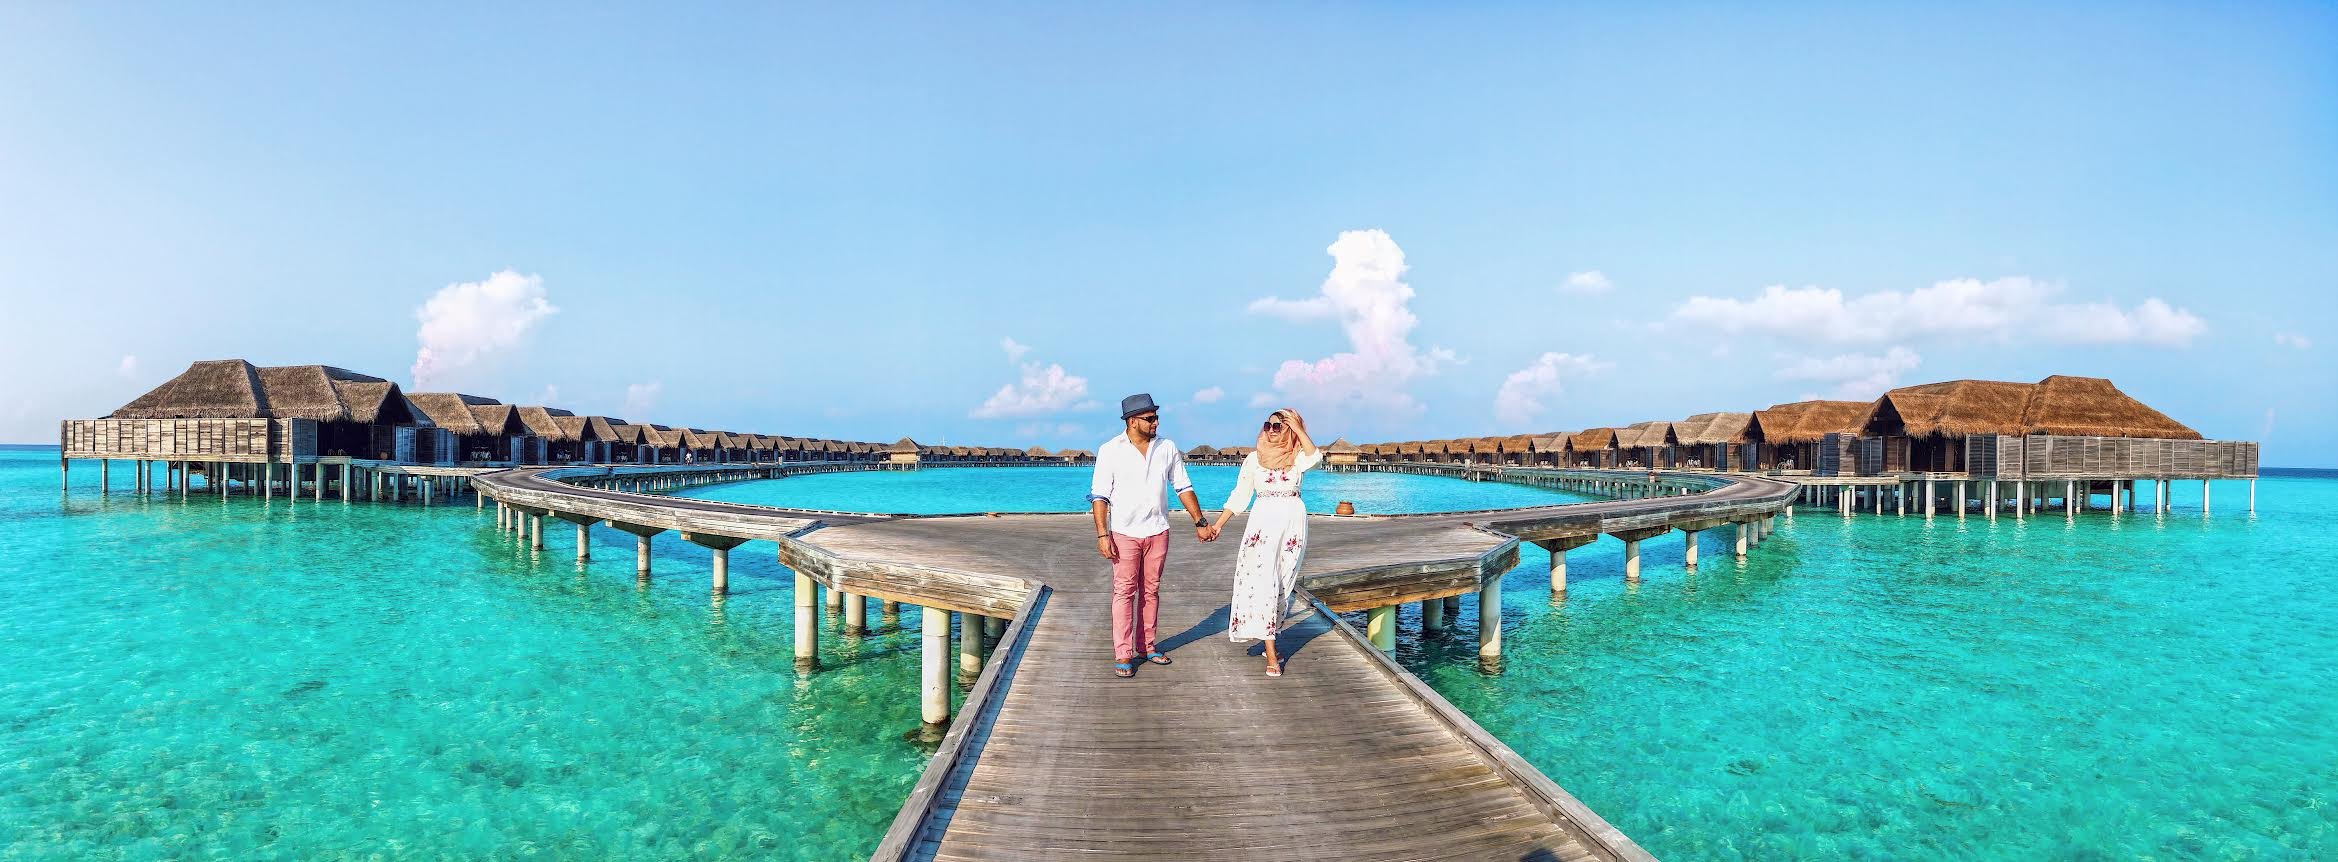 Muslim-travel-blog-Maldives-complete-guide-and-tips